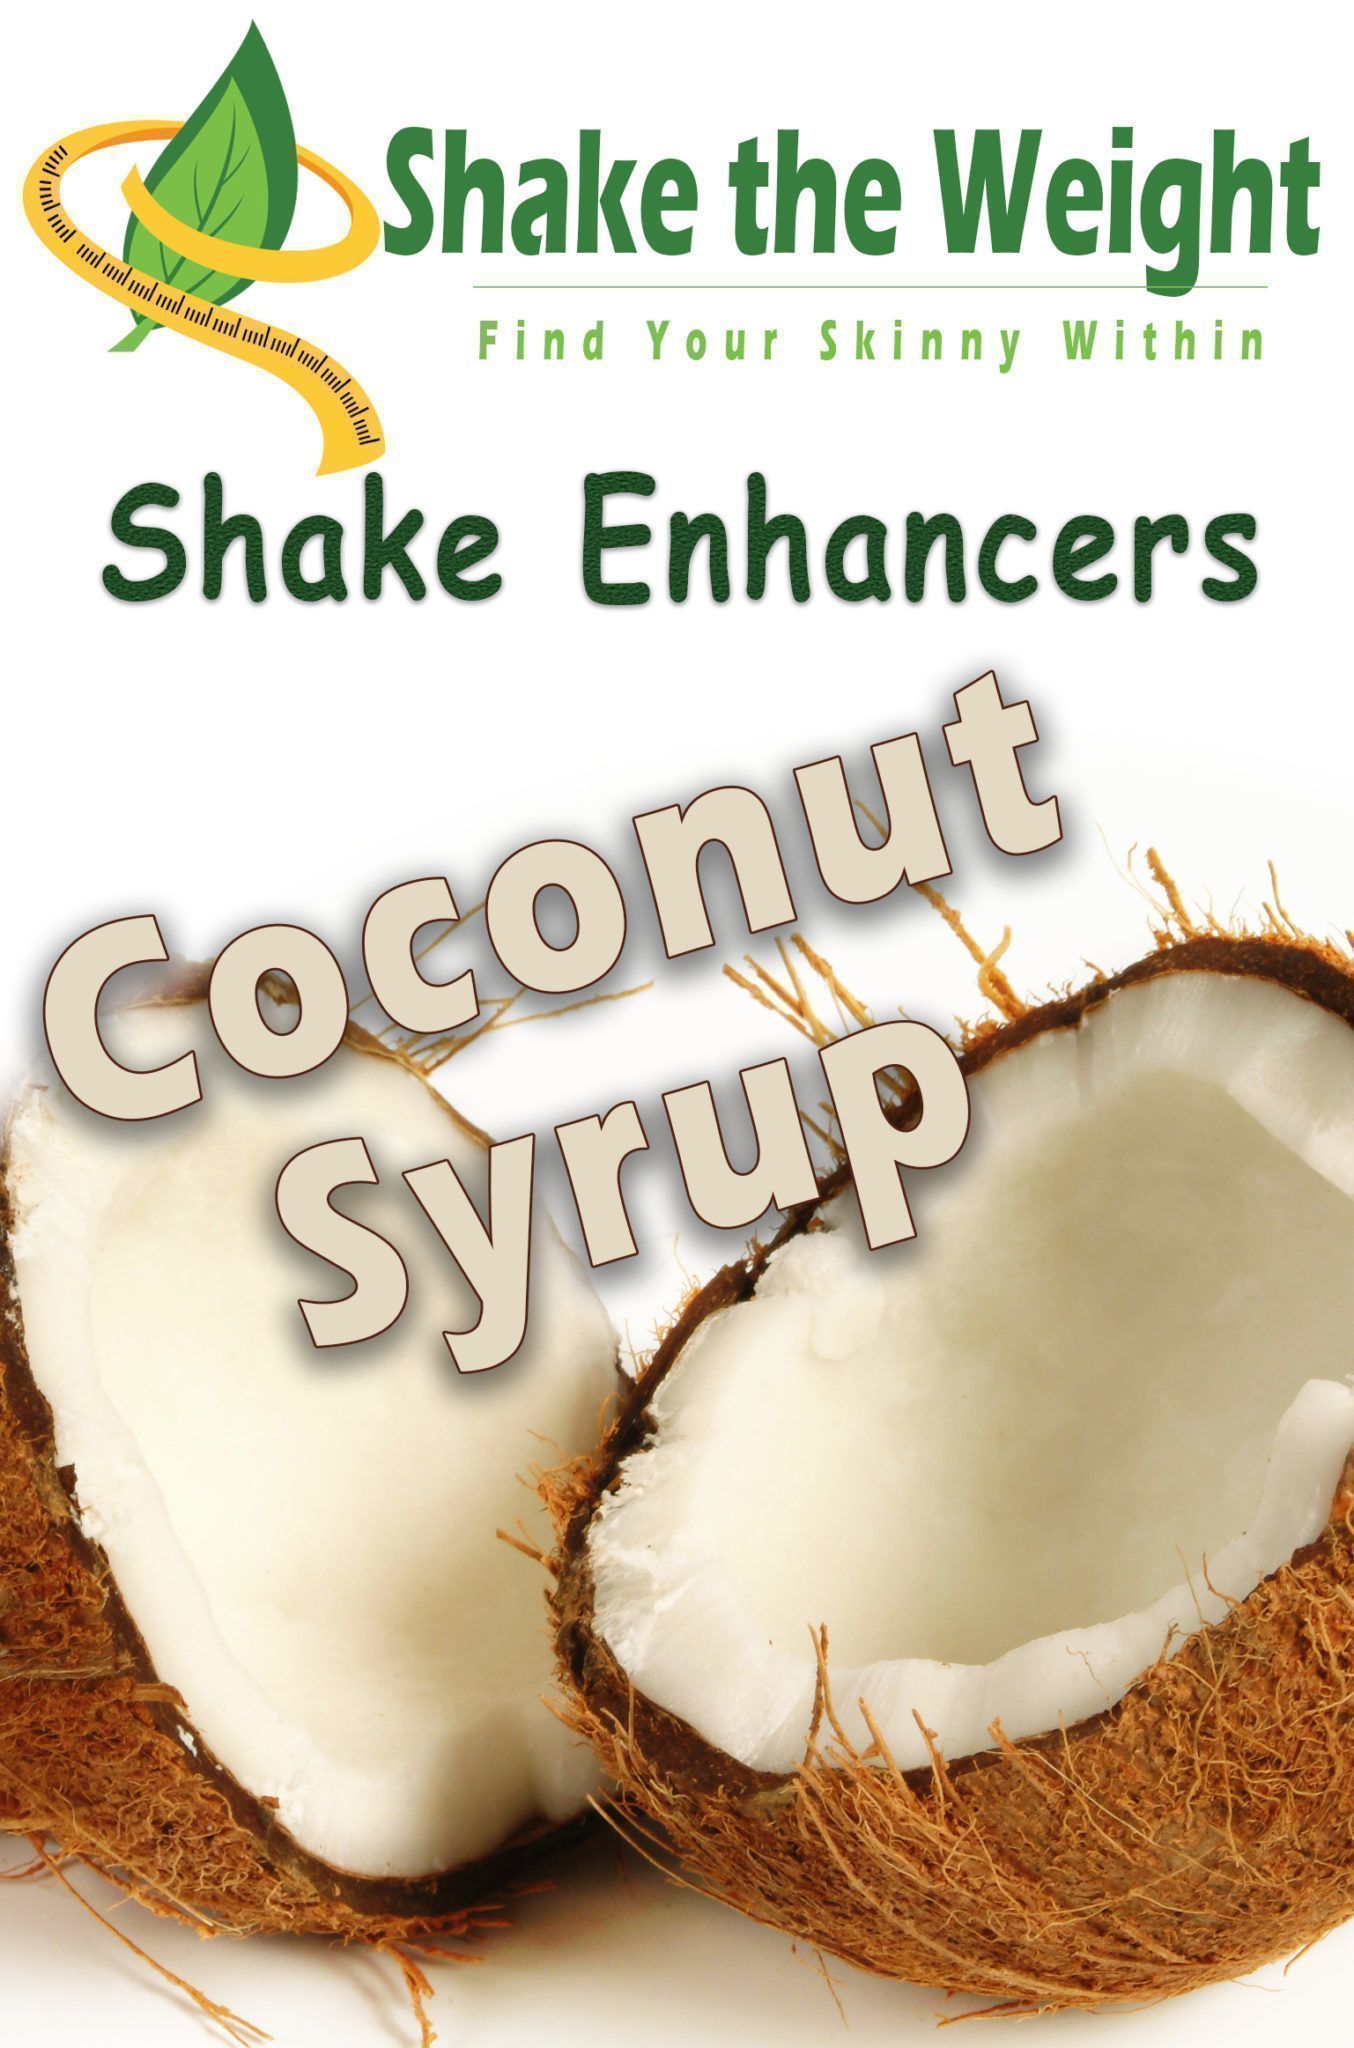 Coconut Syrup, smoothies, weight loss smoothies, smoothie diet, meal replacement smoothie, smoothies for weight loss, smoothie meal replacement, protein smoothies, sugar free Syrup